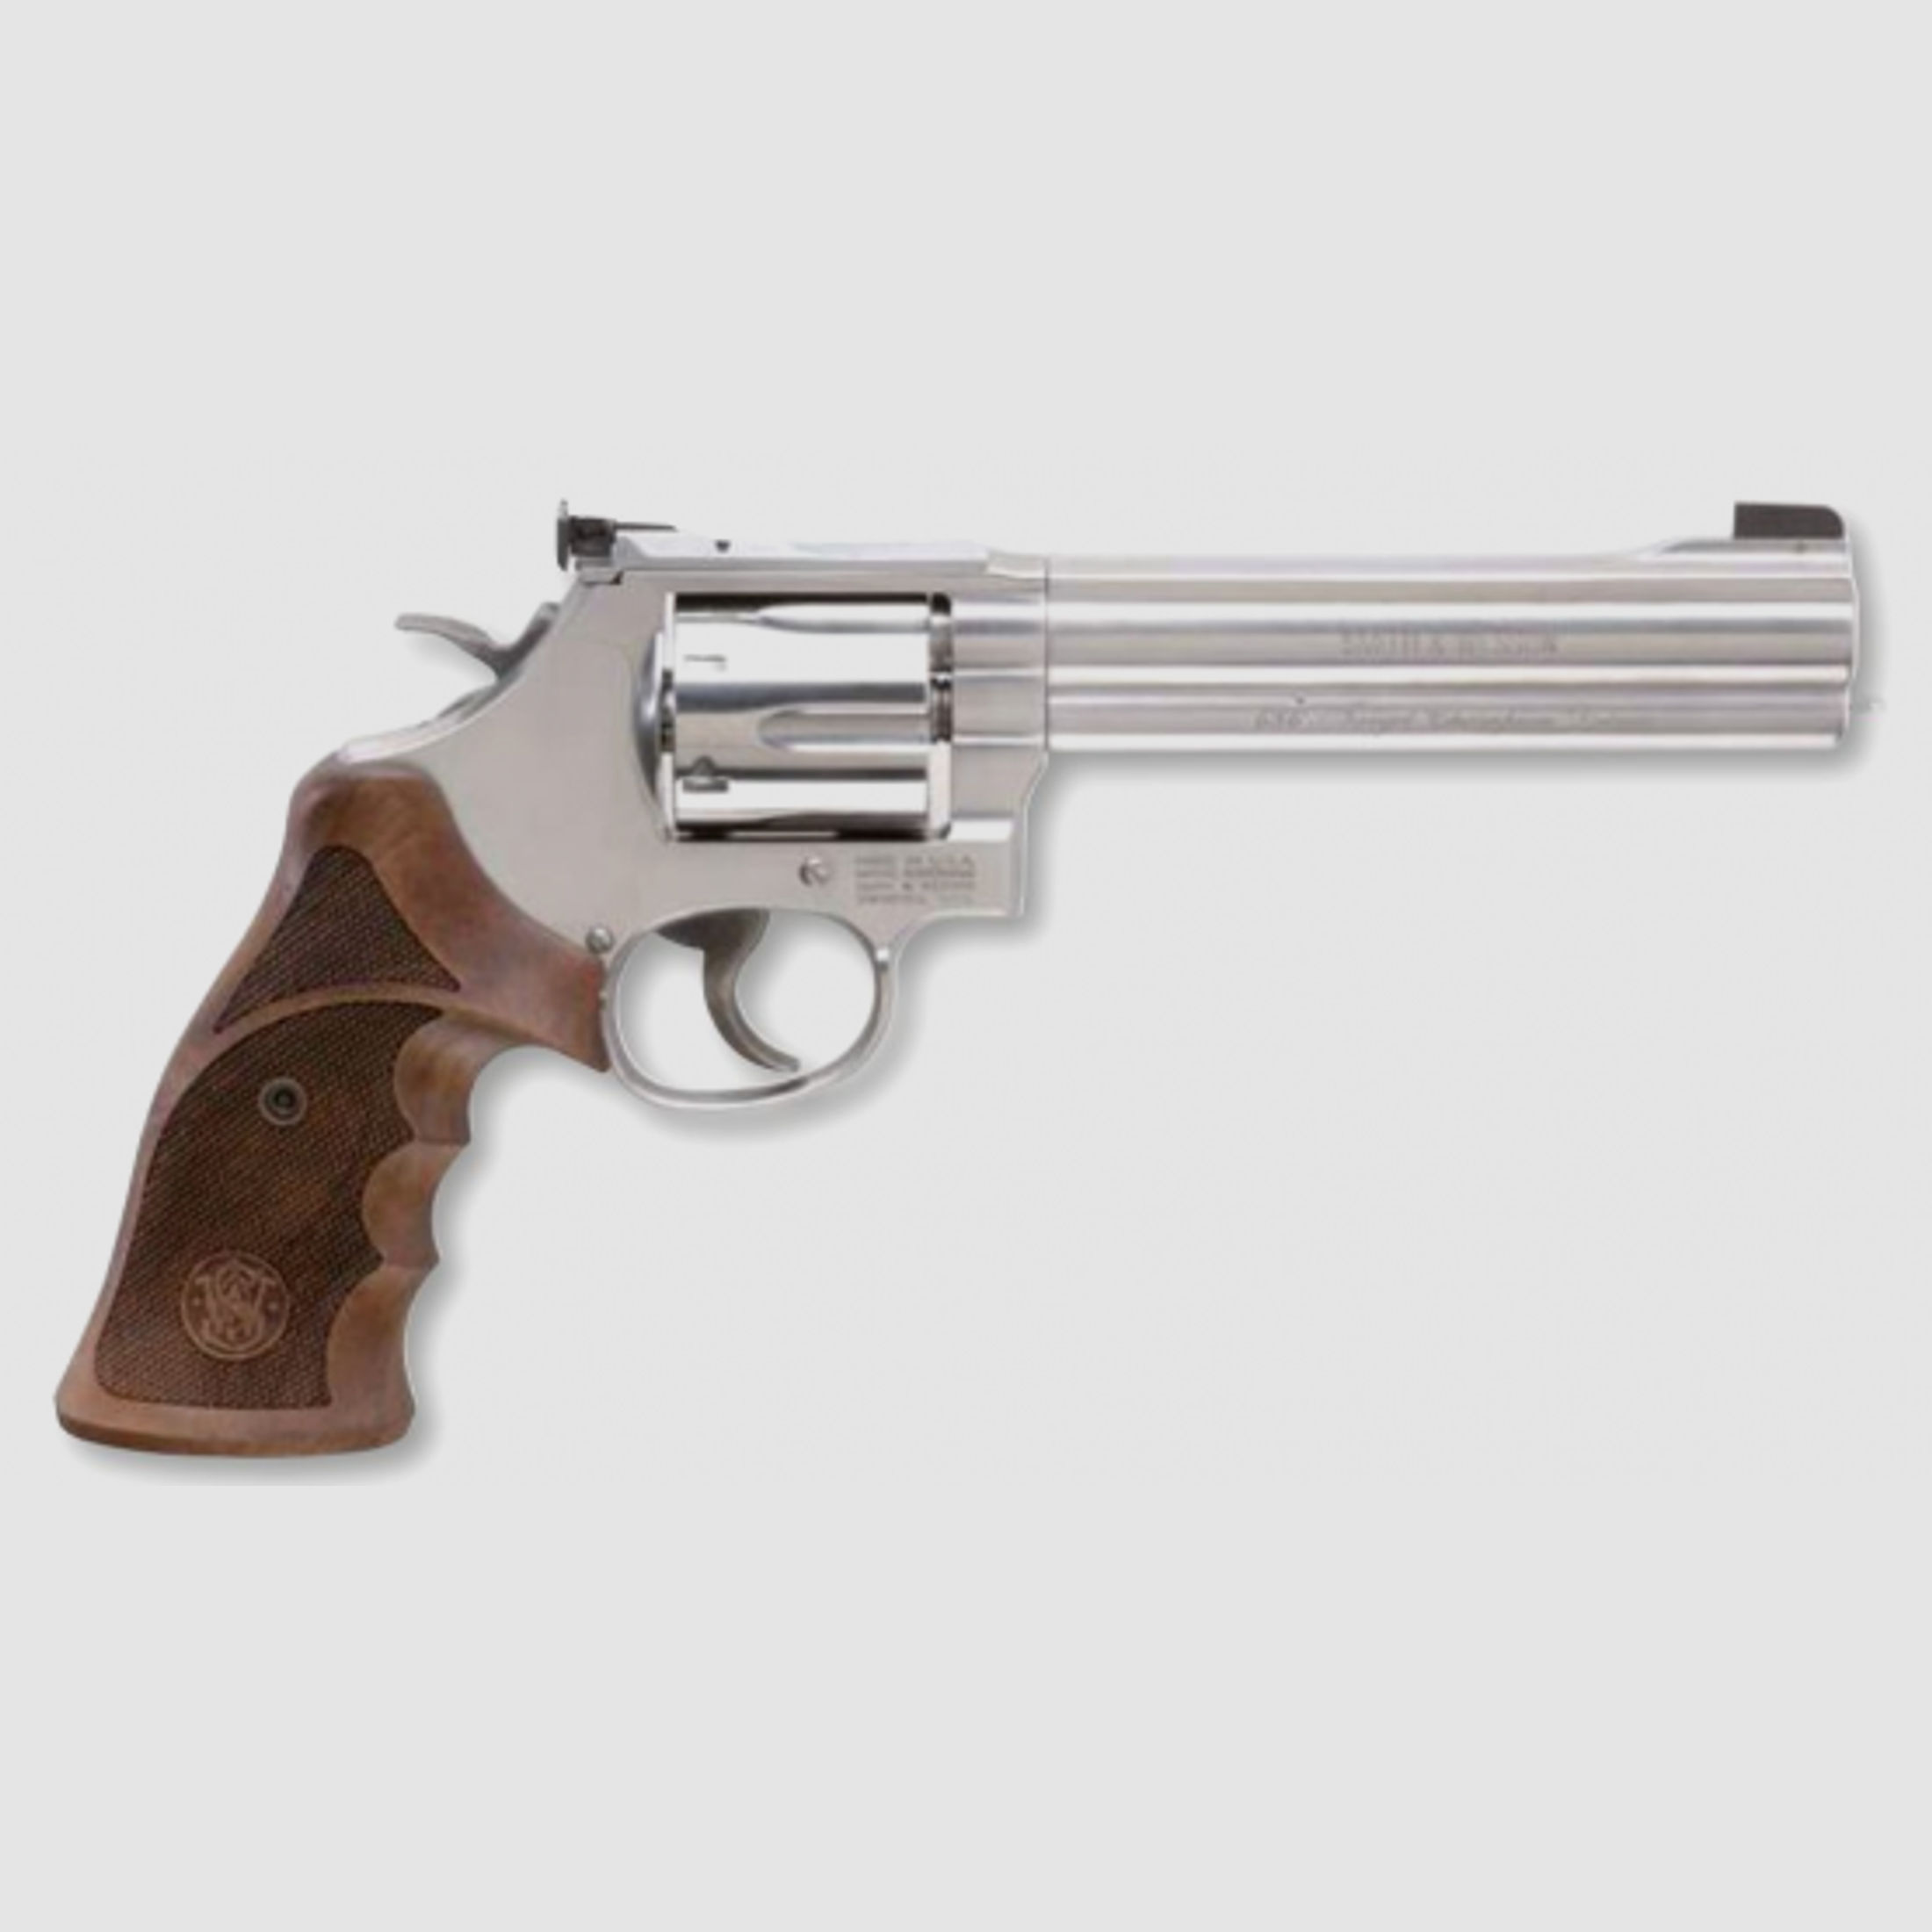 Smith & Wesson Mod. 686 Target Champion Deluxe Kaliber .357 Magnum Revolver